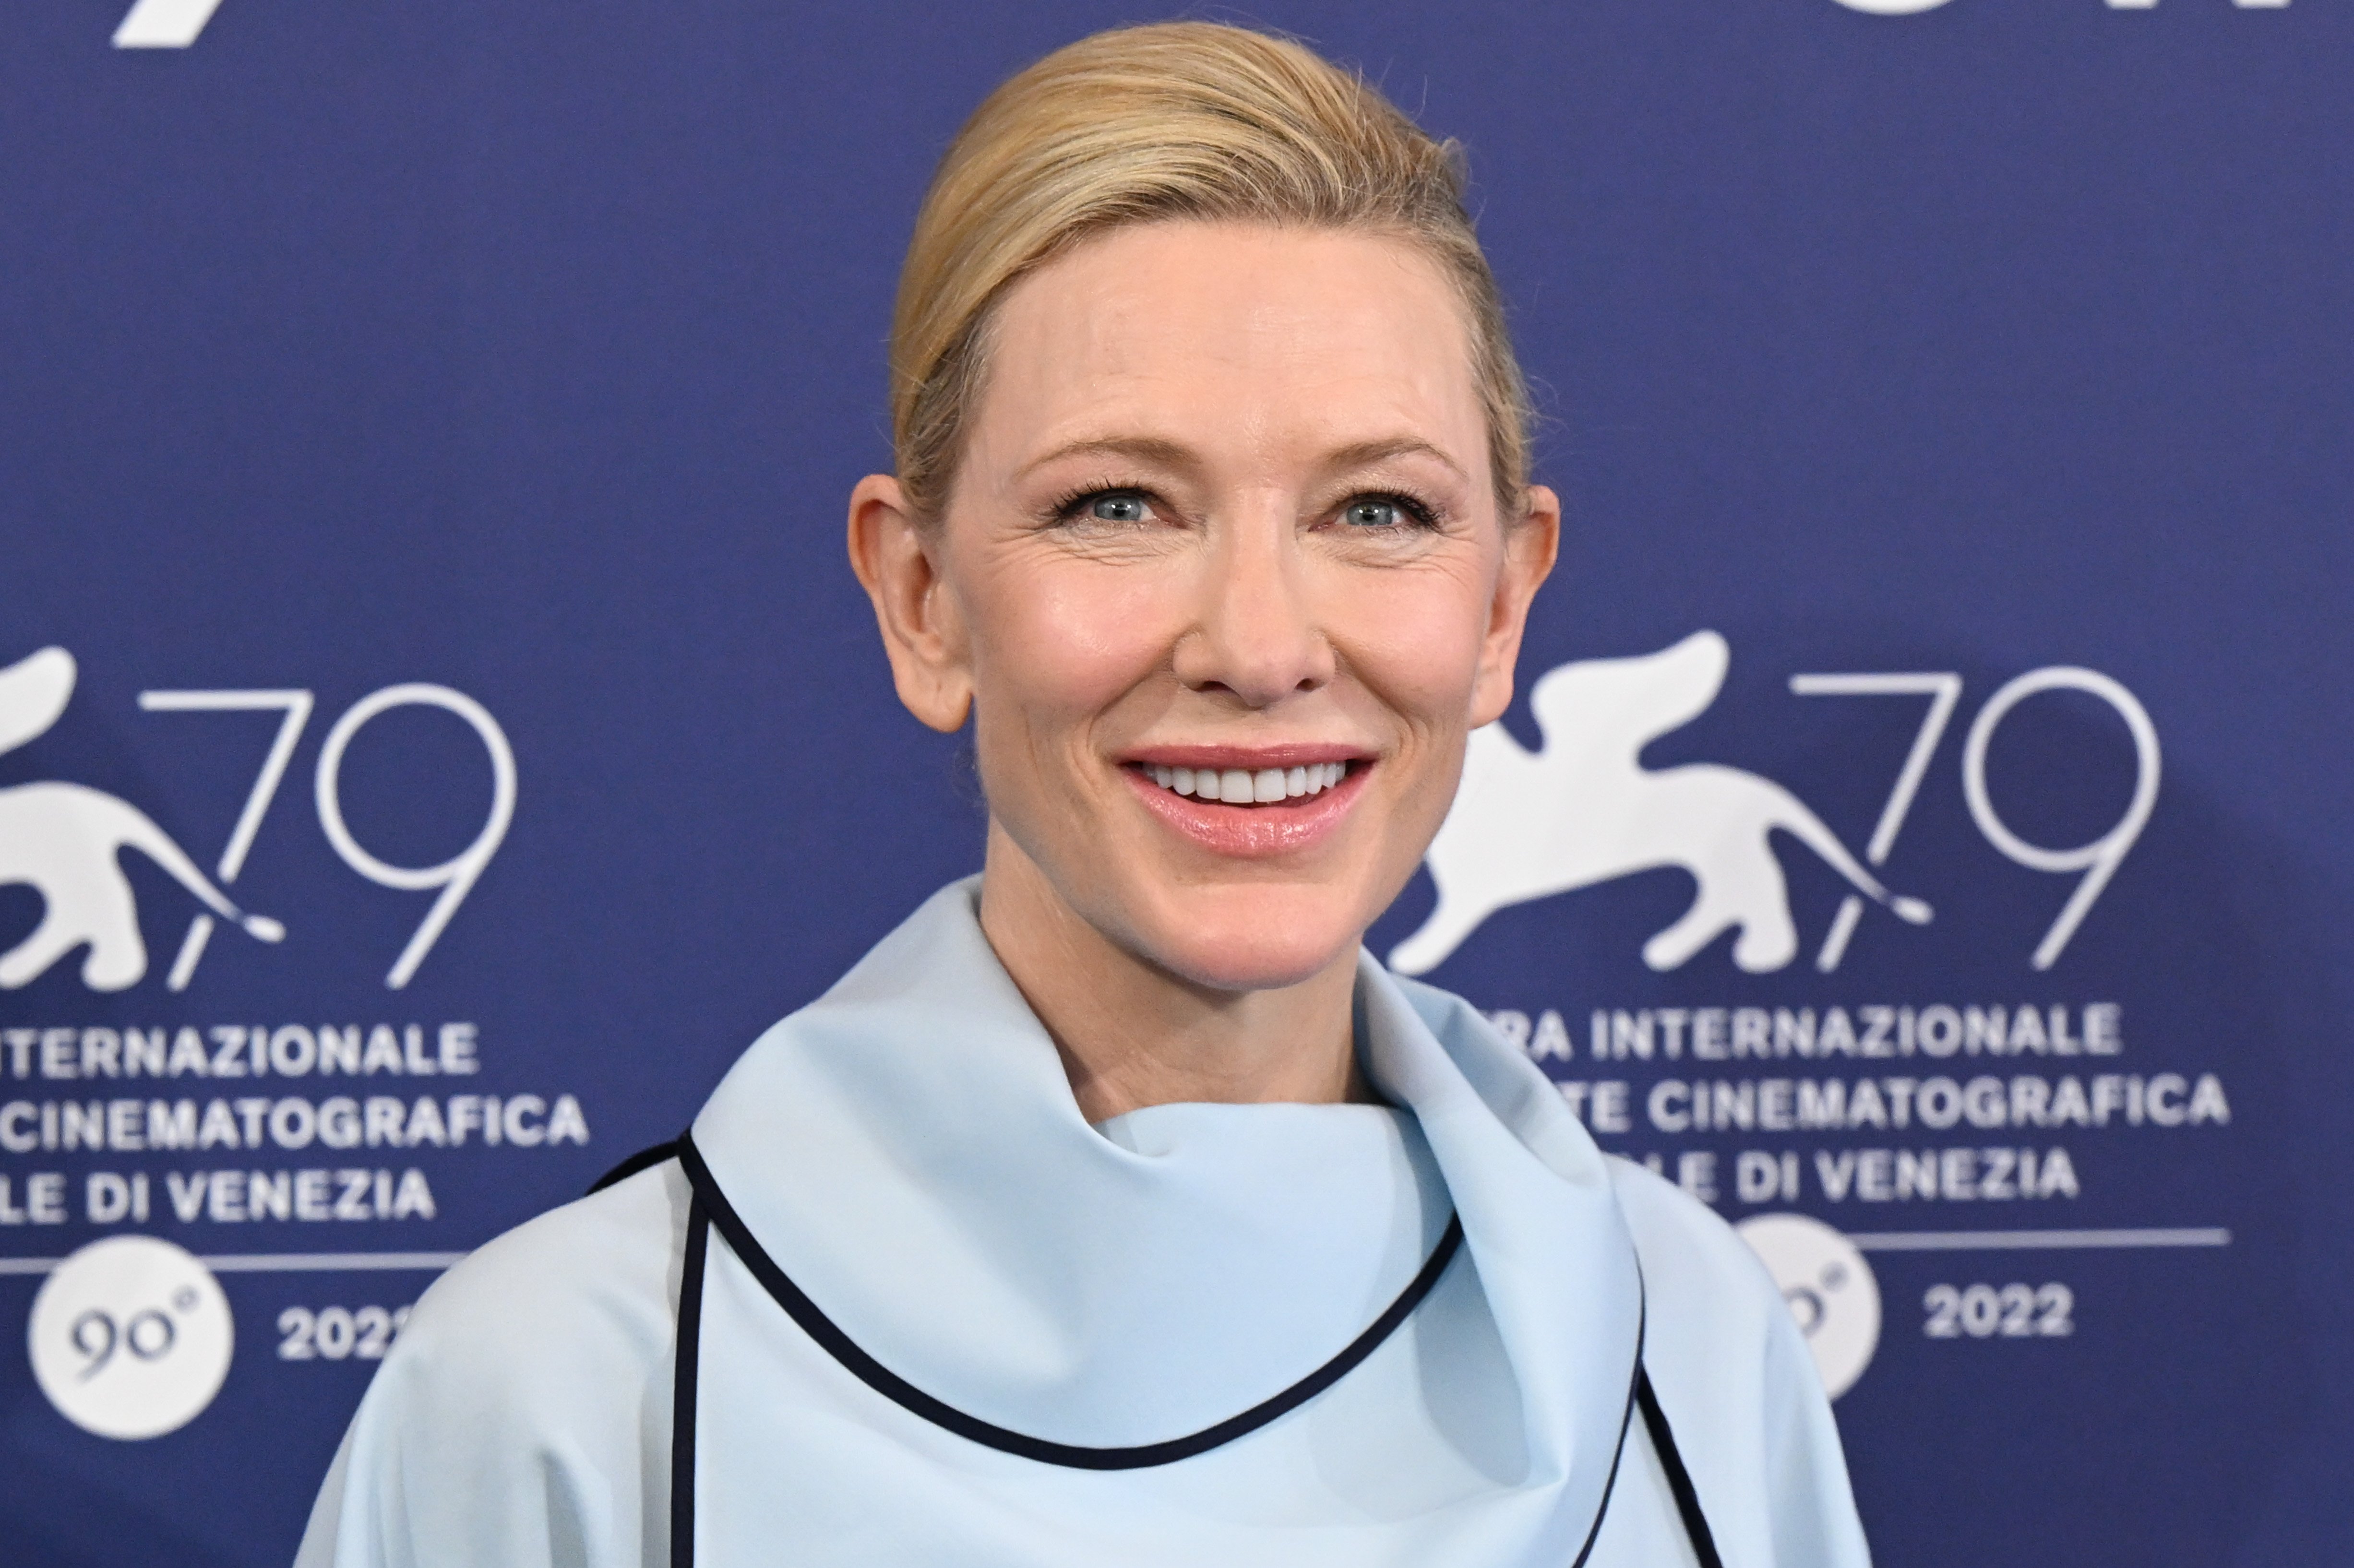 Cate Blanchett during the "Tar" at the 79th Venice International Film Festival on September 01, 2022 in Venice, Italy. | Source: Getty Images